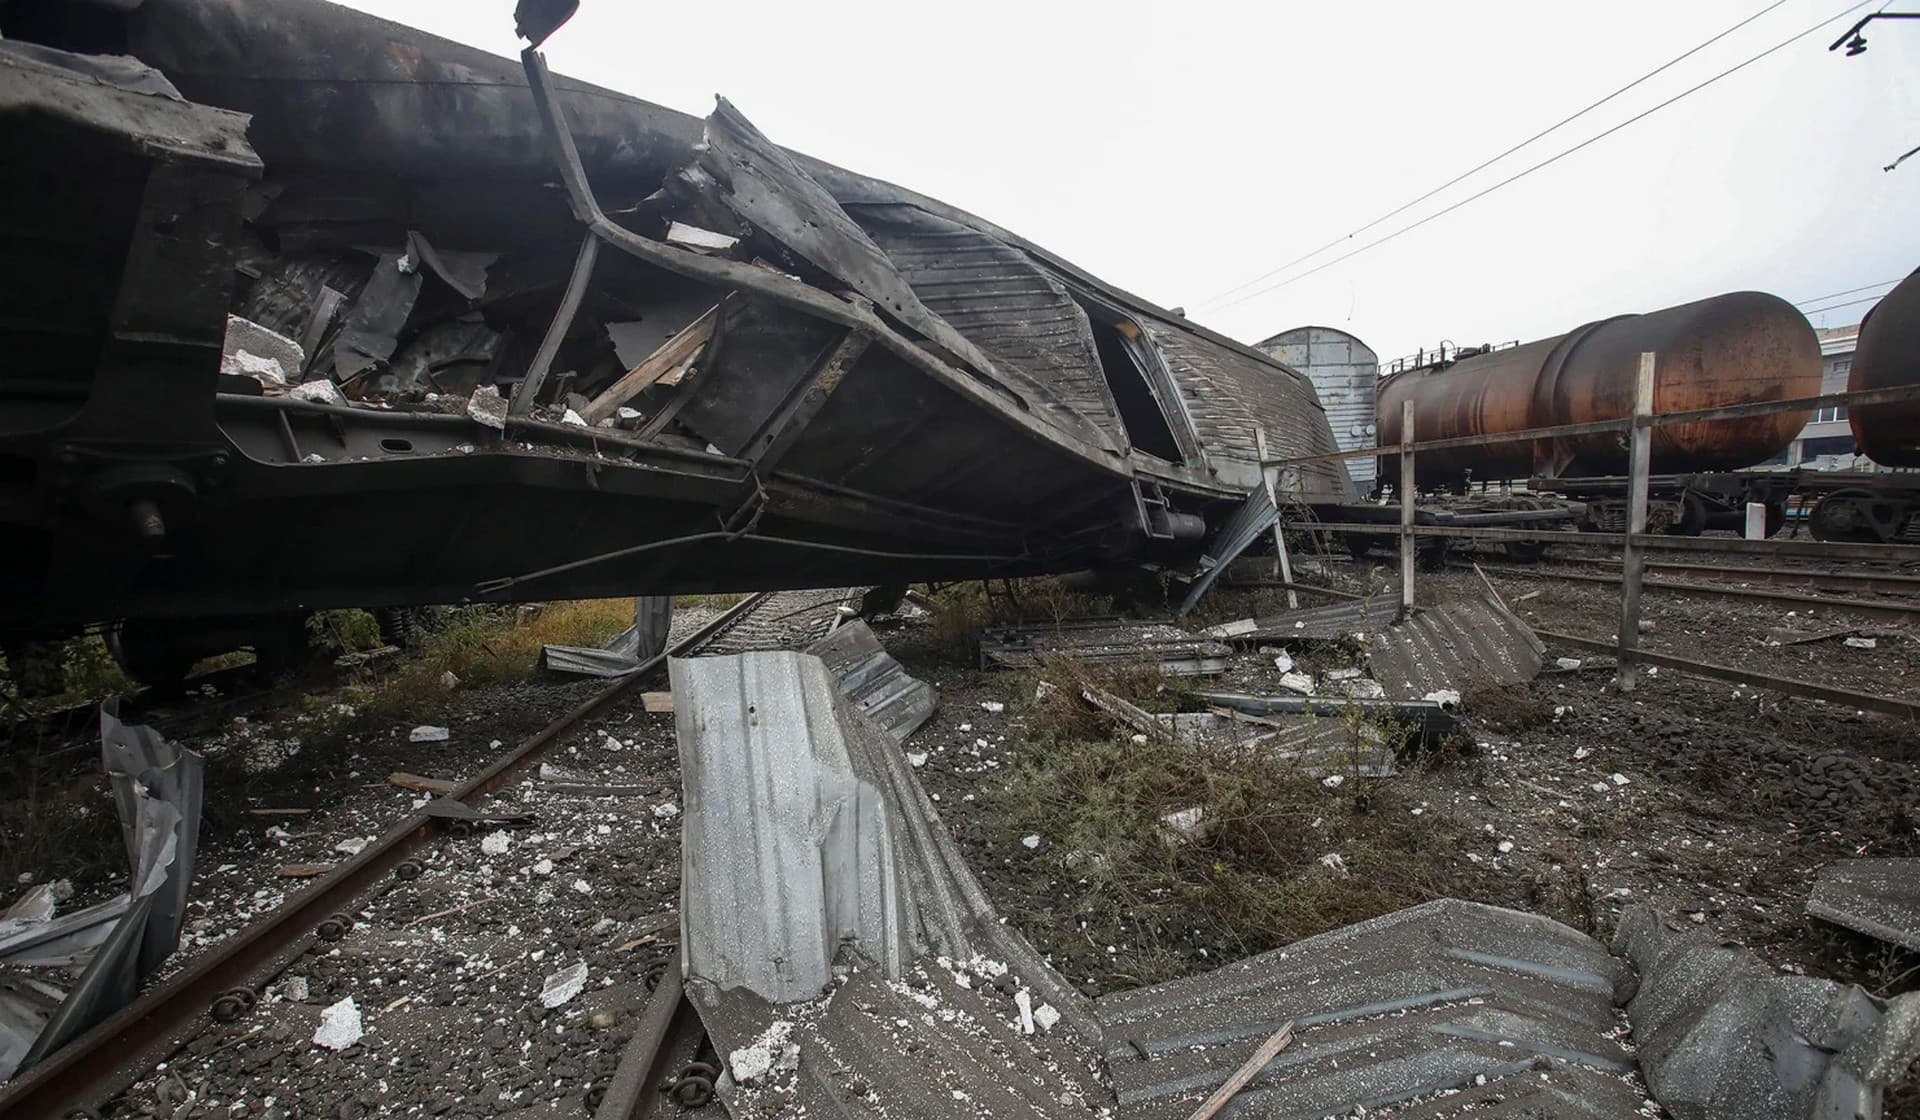 Railway cars destroyed by a Russian missile strike at a cargo terminal in Kharkiv